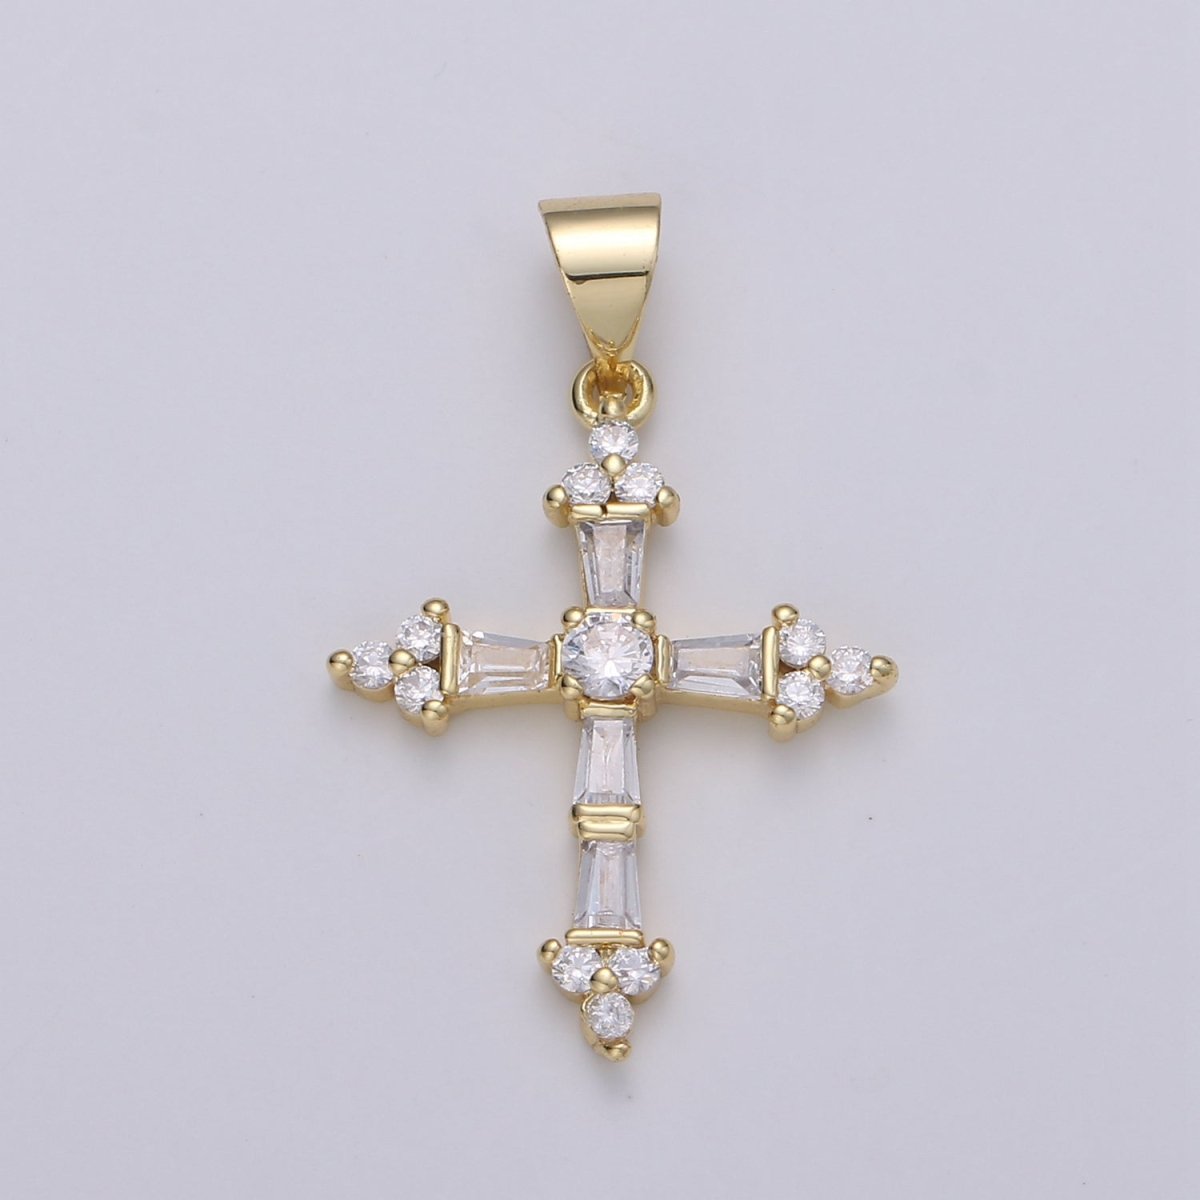 1pc Wholesale 14K Gold Plated Cross Pendant with Cubic Zirconia Crystal Rhinestones, Christian Pendant for Necklace Bracelet Anklet Making - DLUXCA